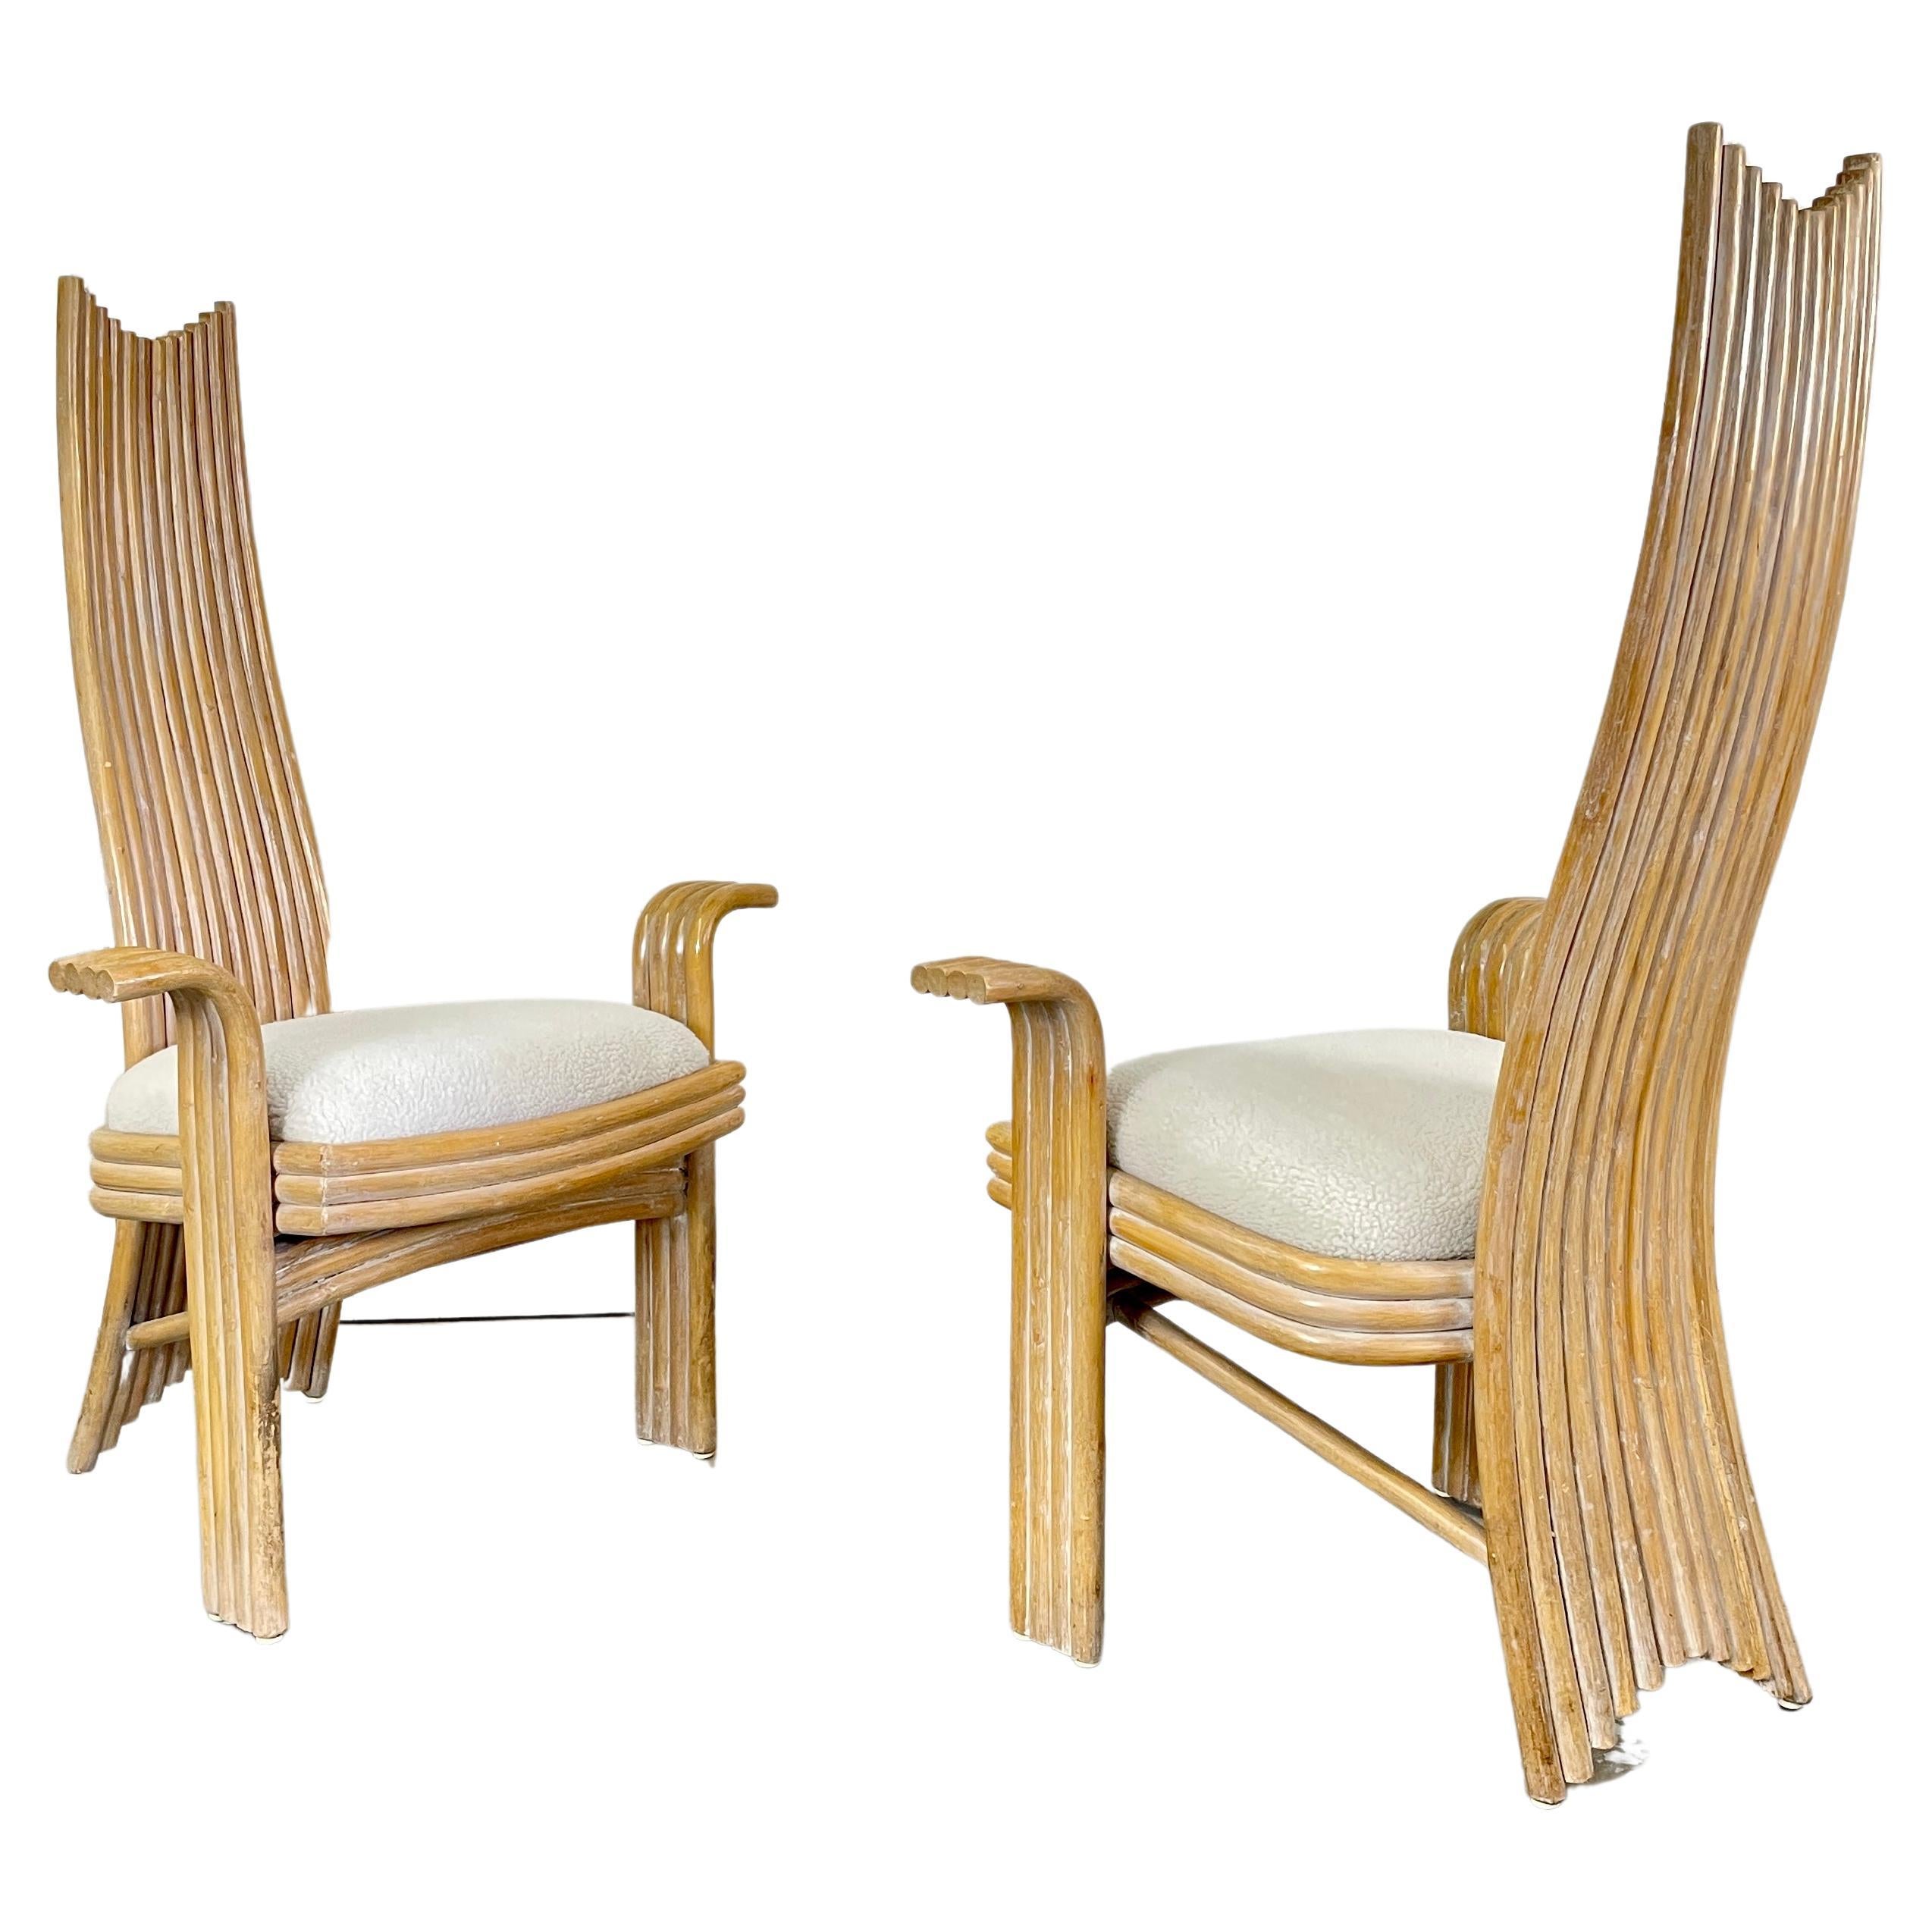 Danny Ho Fong Style Rattan Arm Chairs, A Pair For Sale